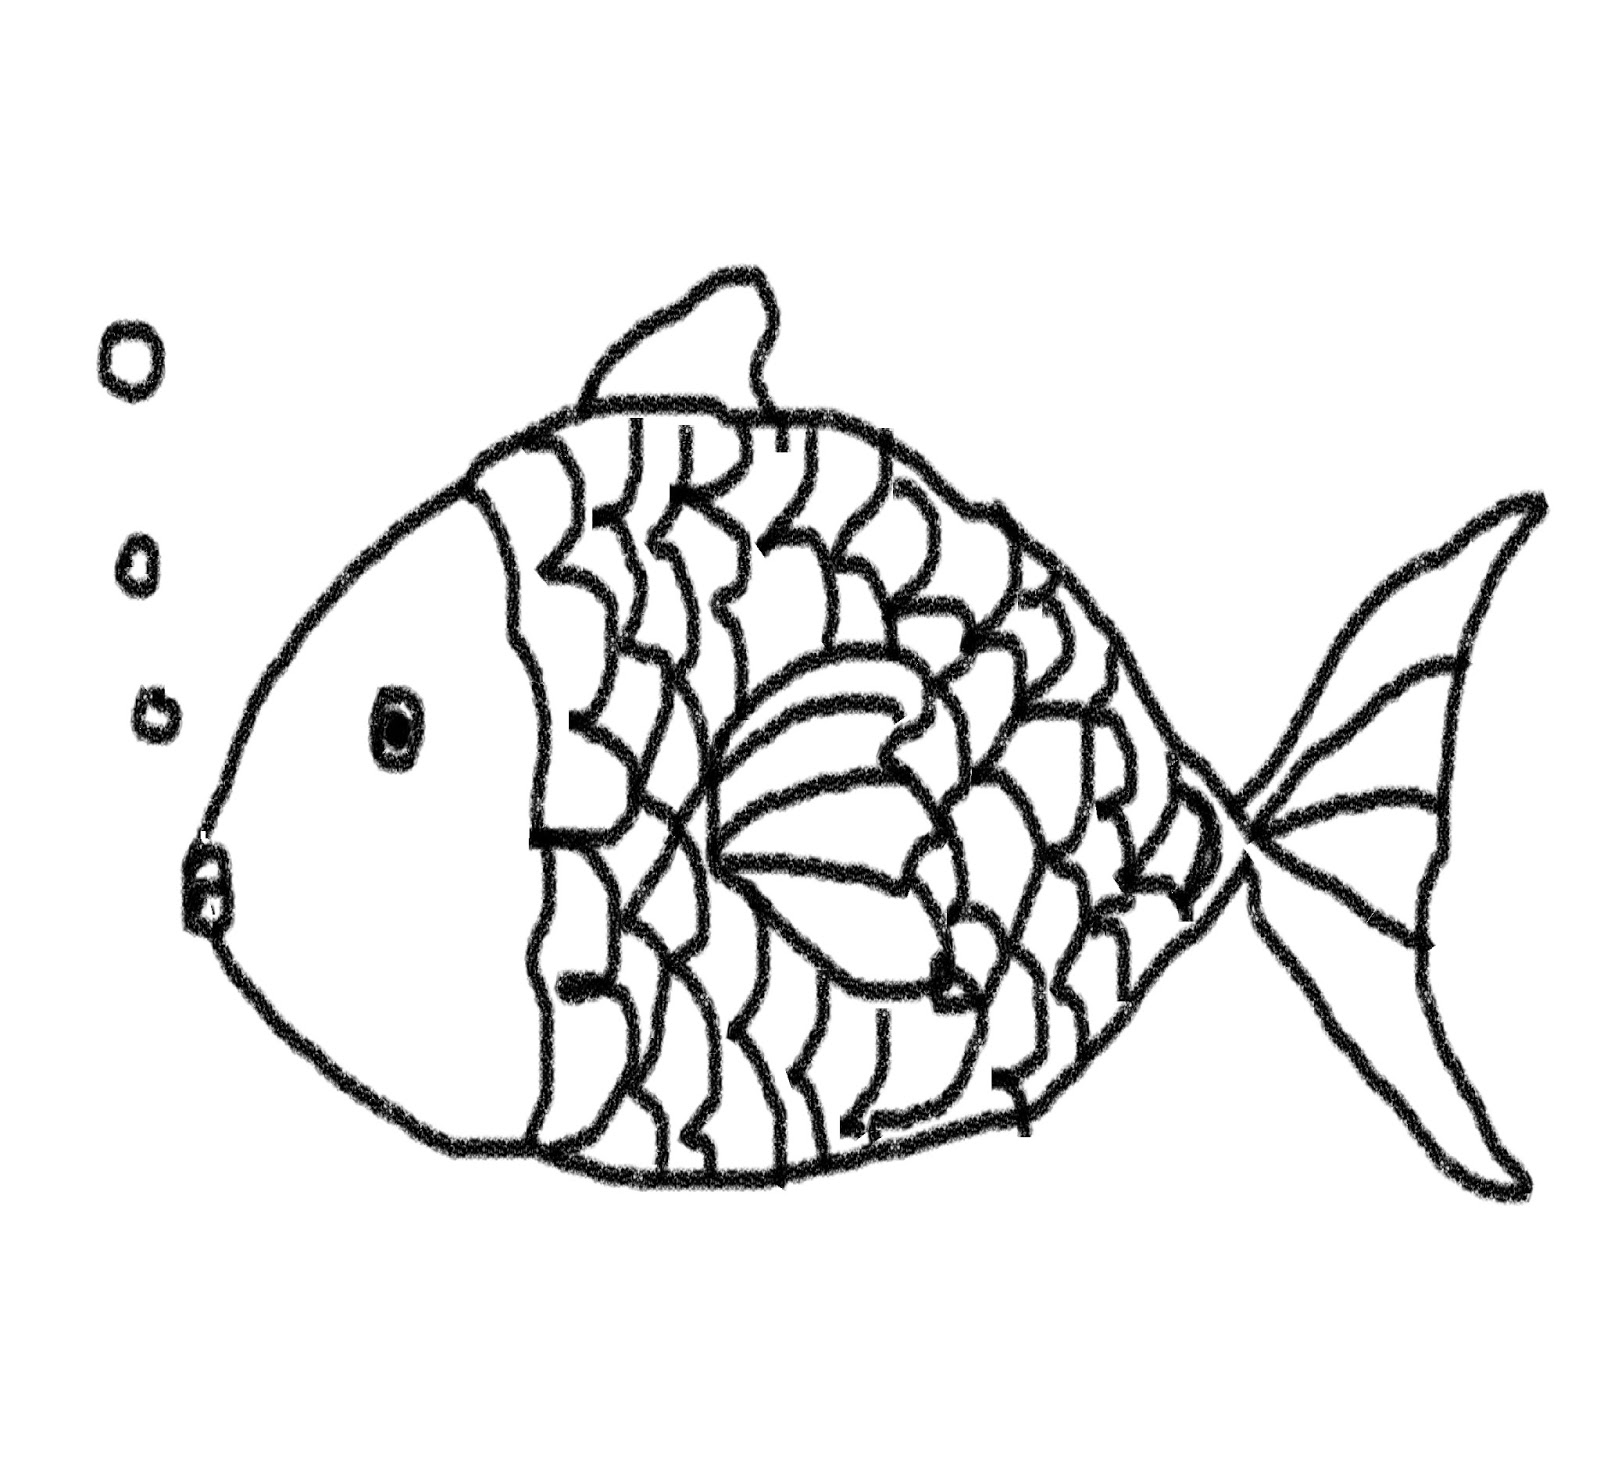 Tips For Improving Your Fish Drawings